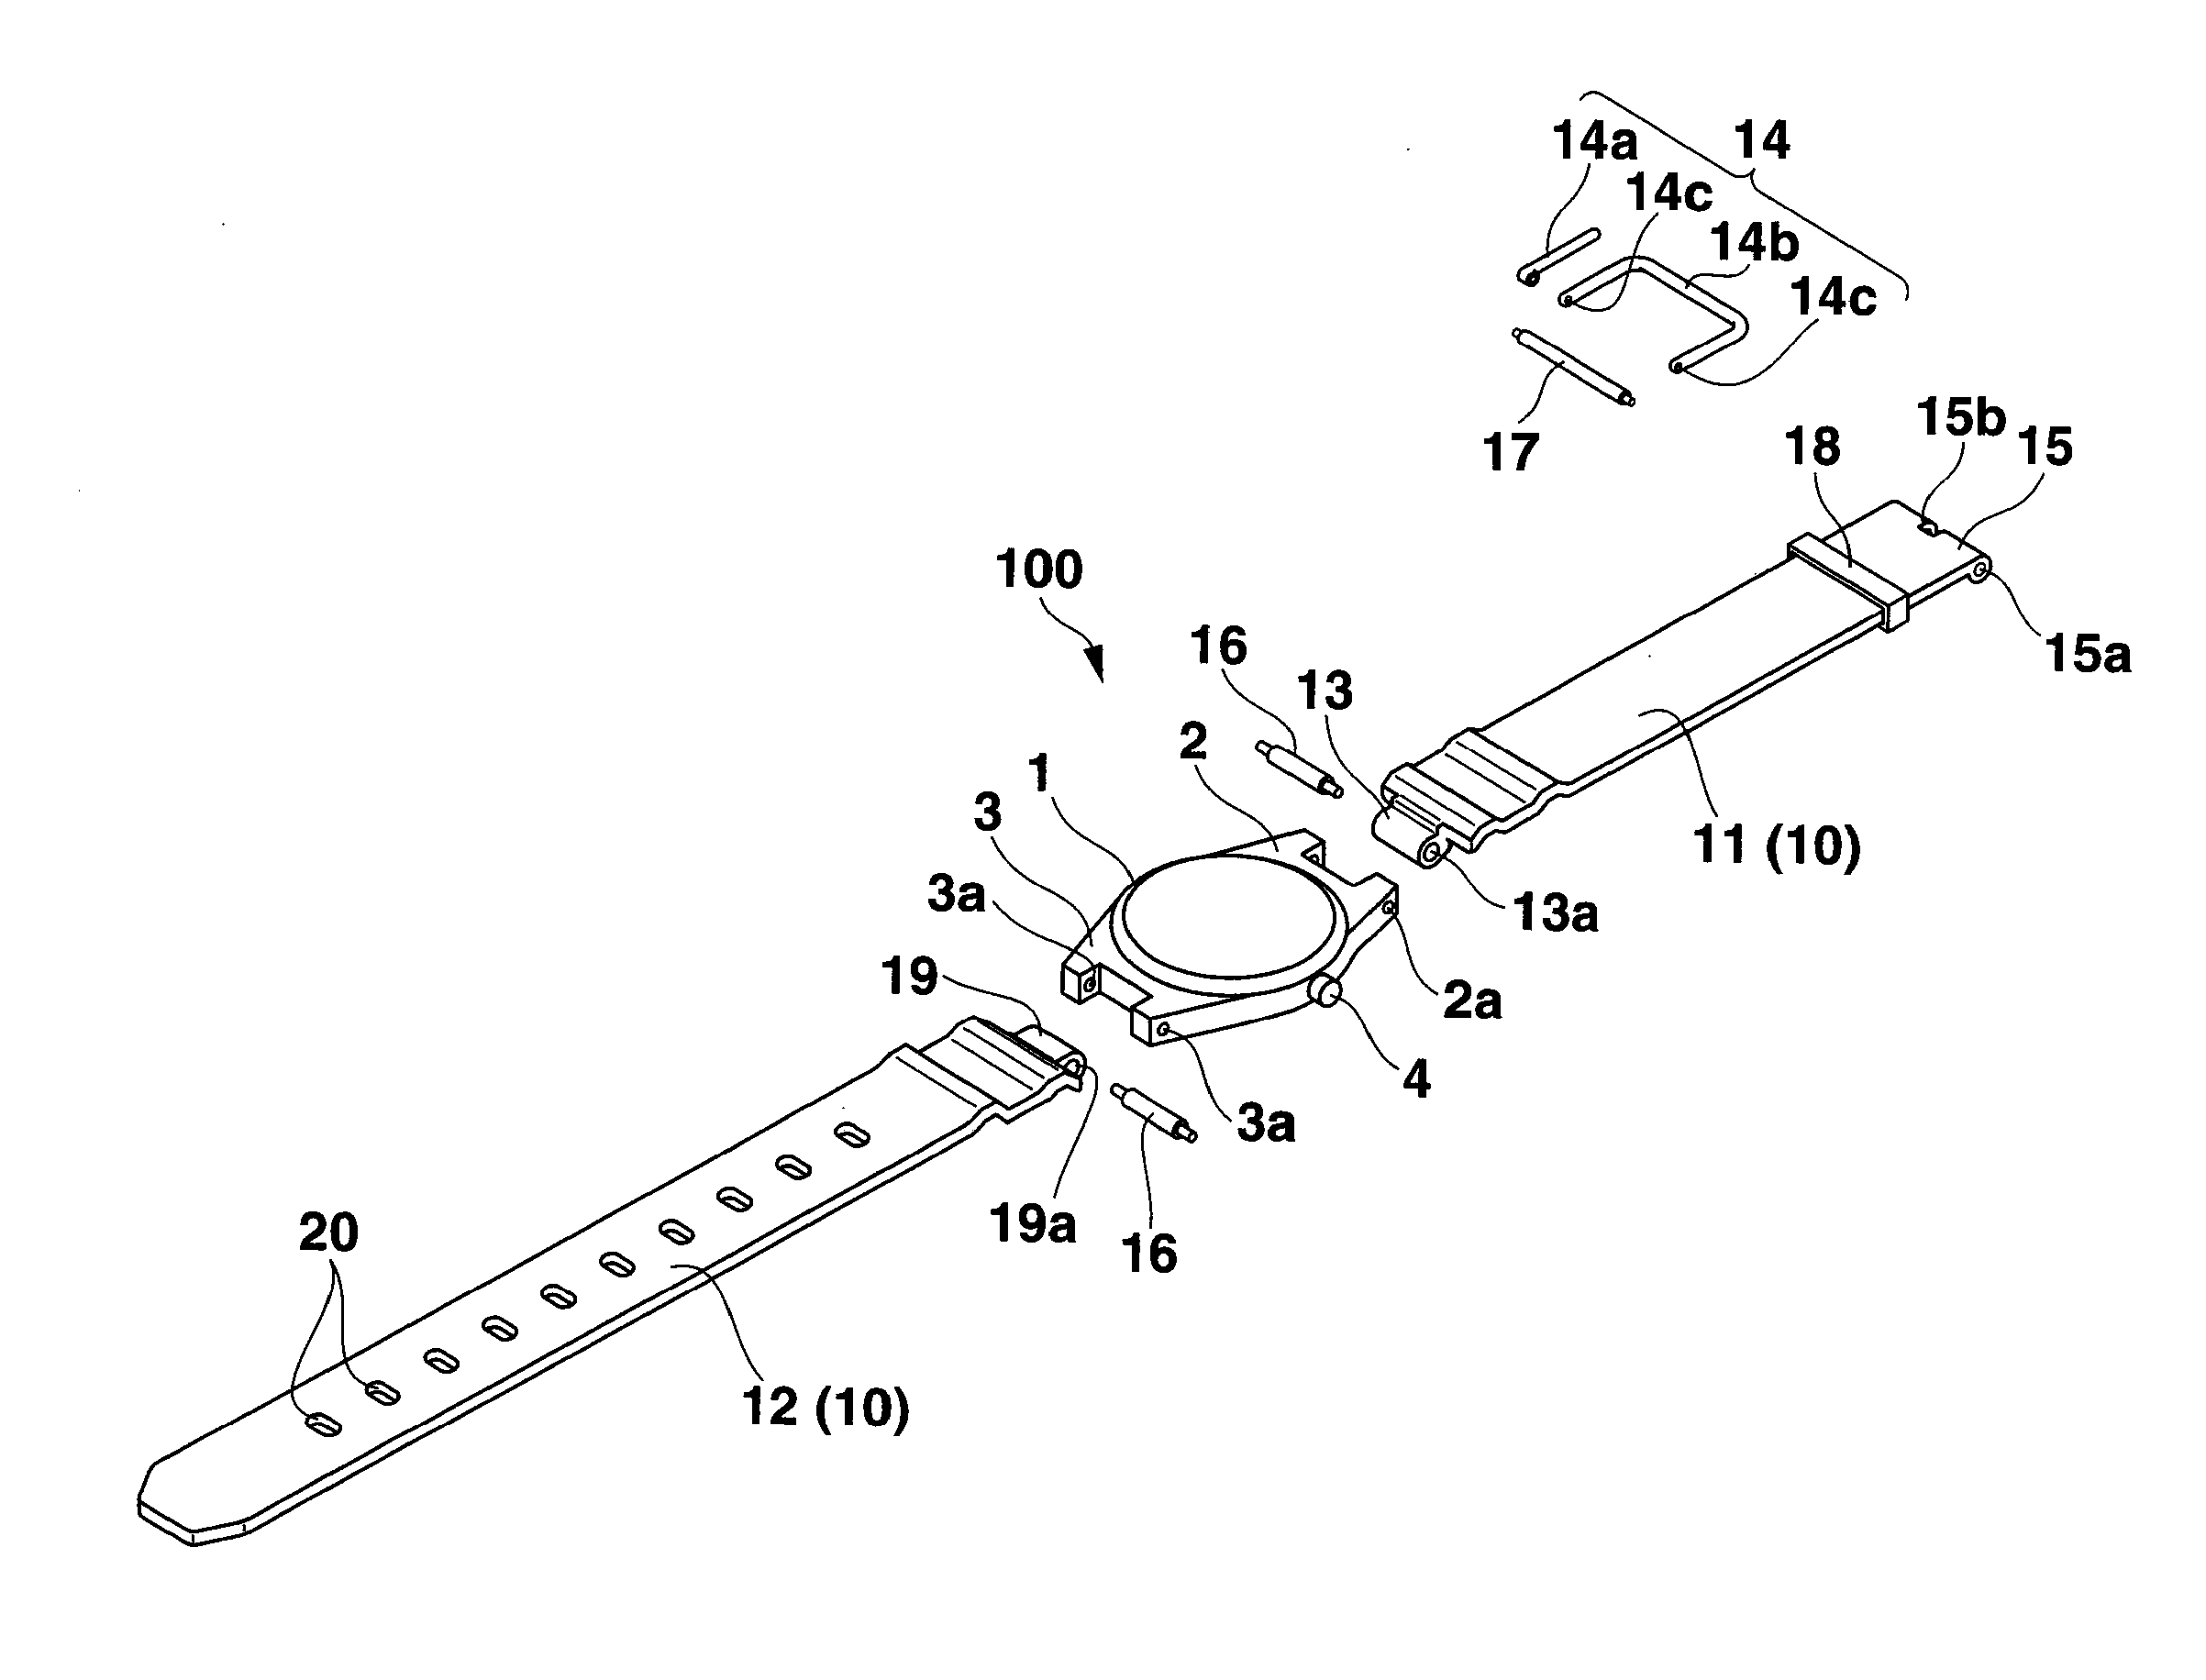 Band, wristwatch with the band and method of making the band